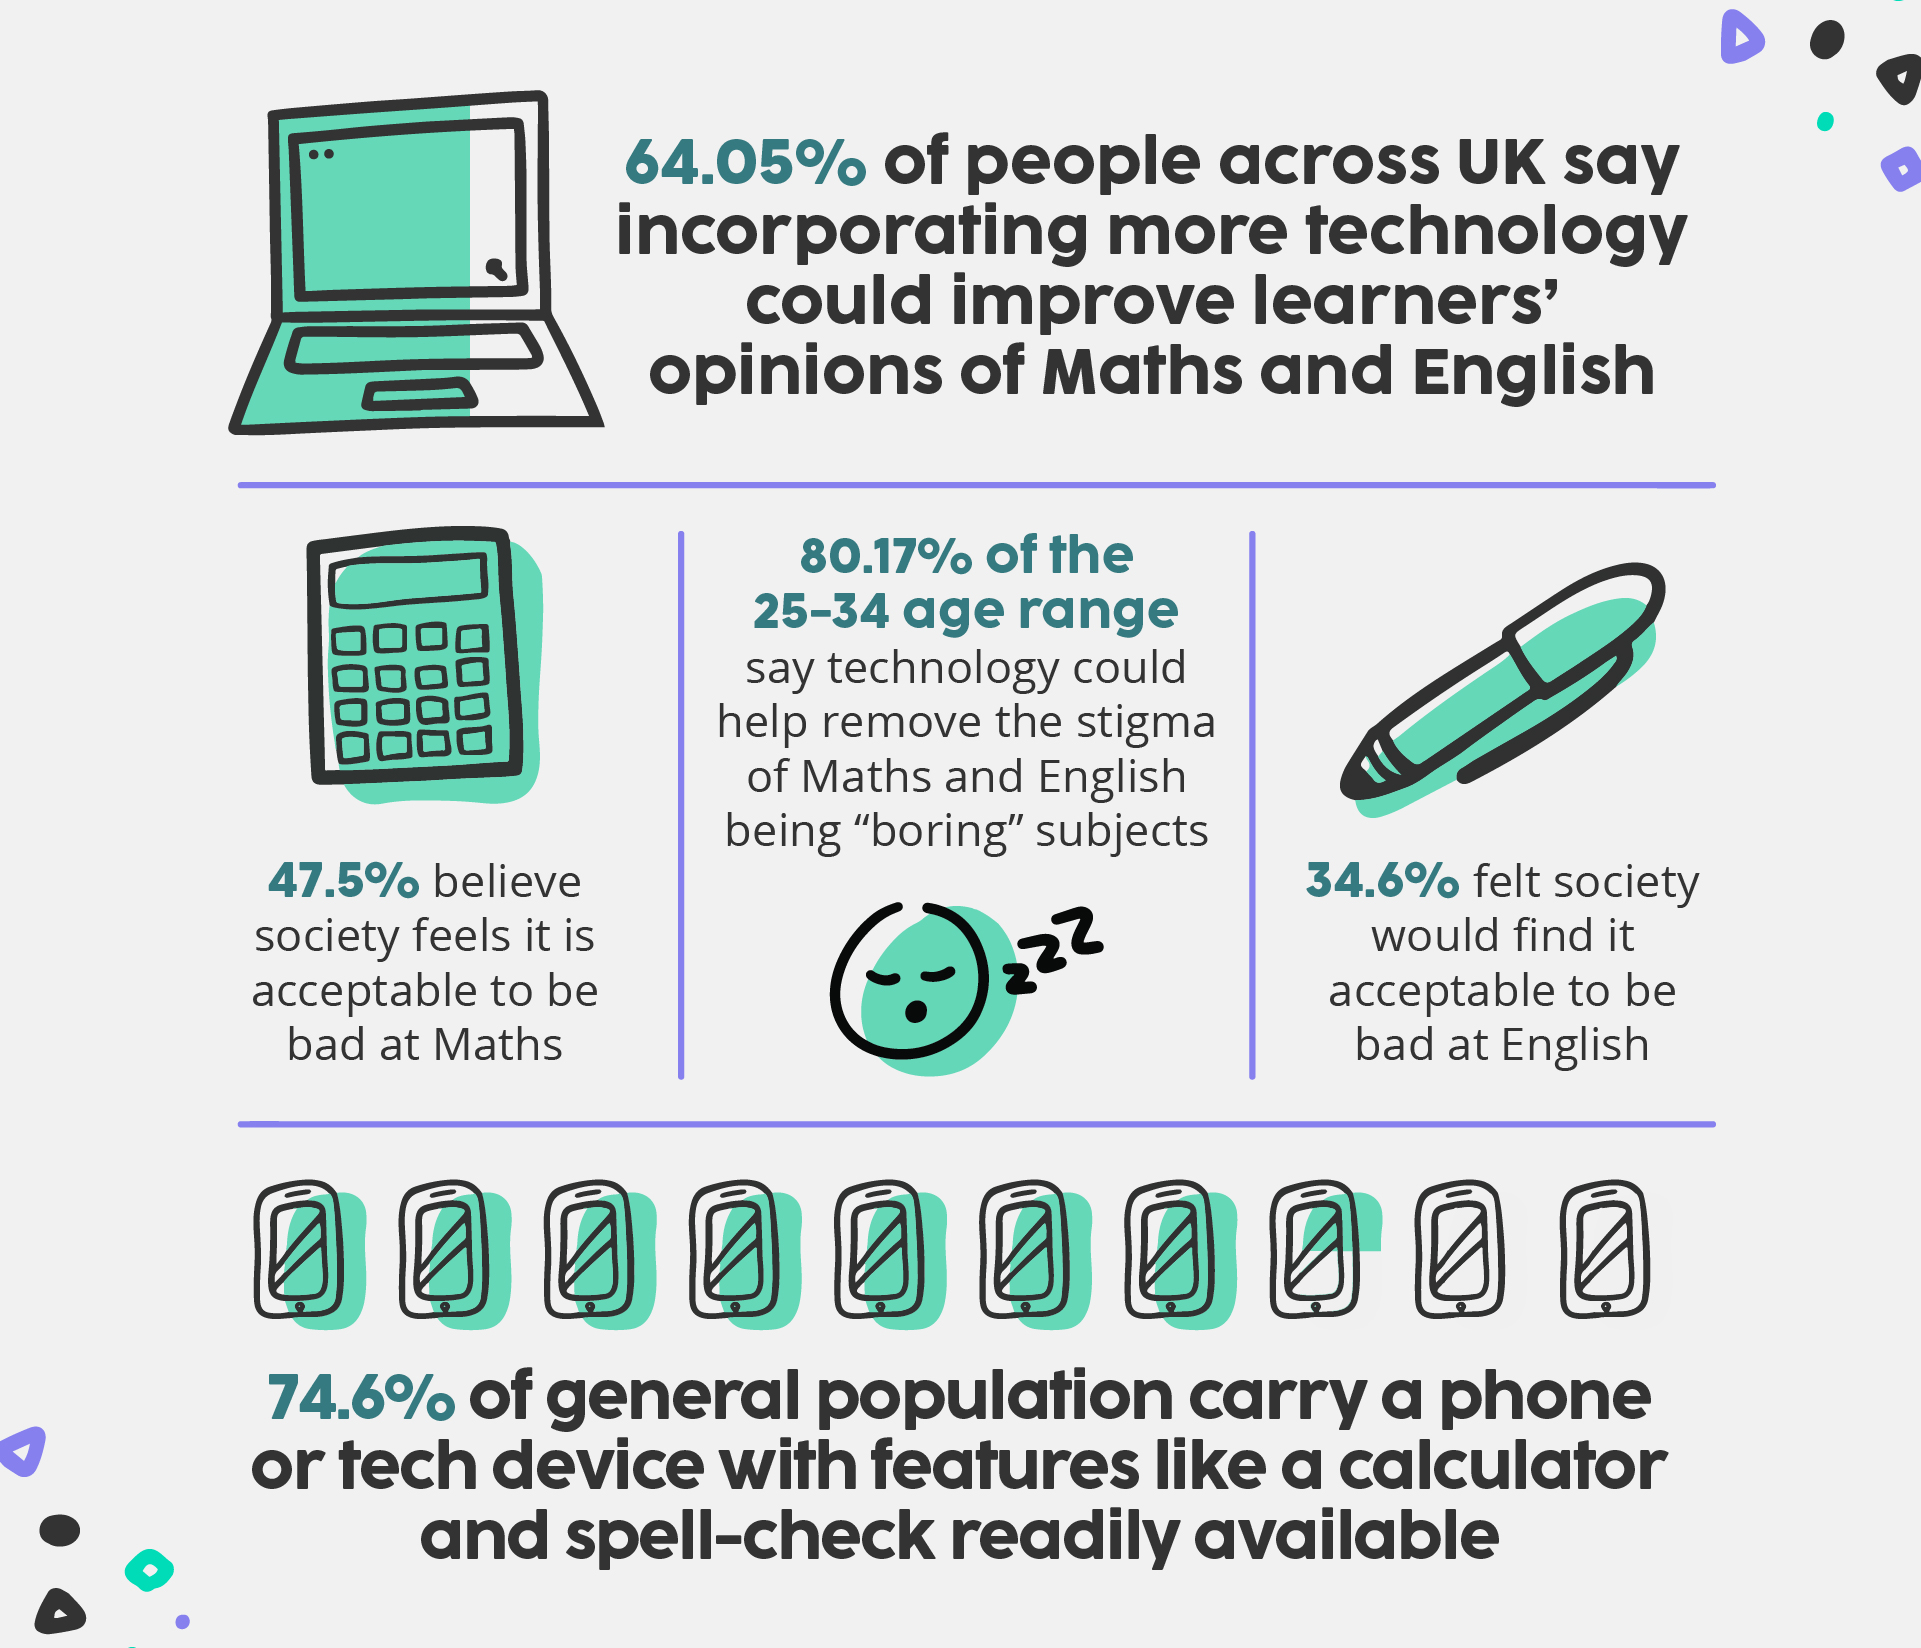 Technology devices and how they can help Maths and English skills